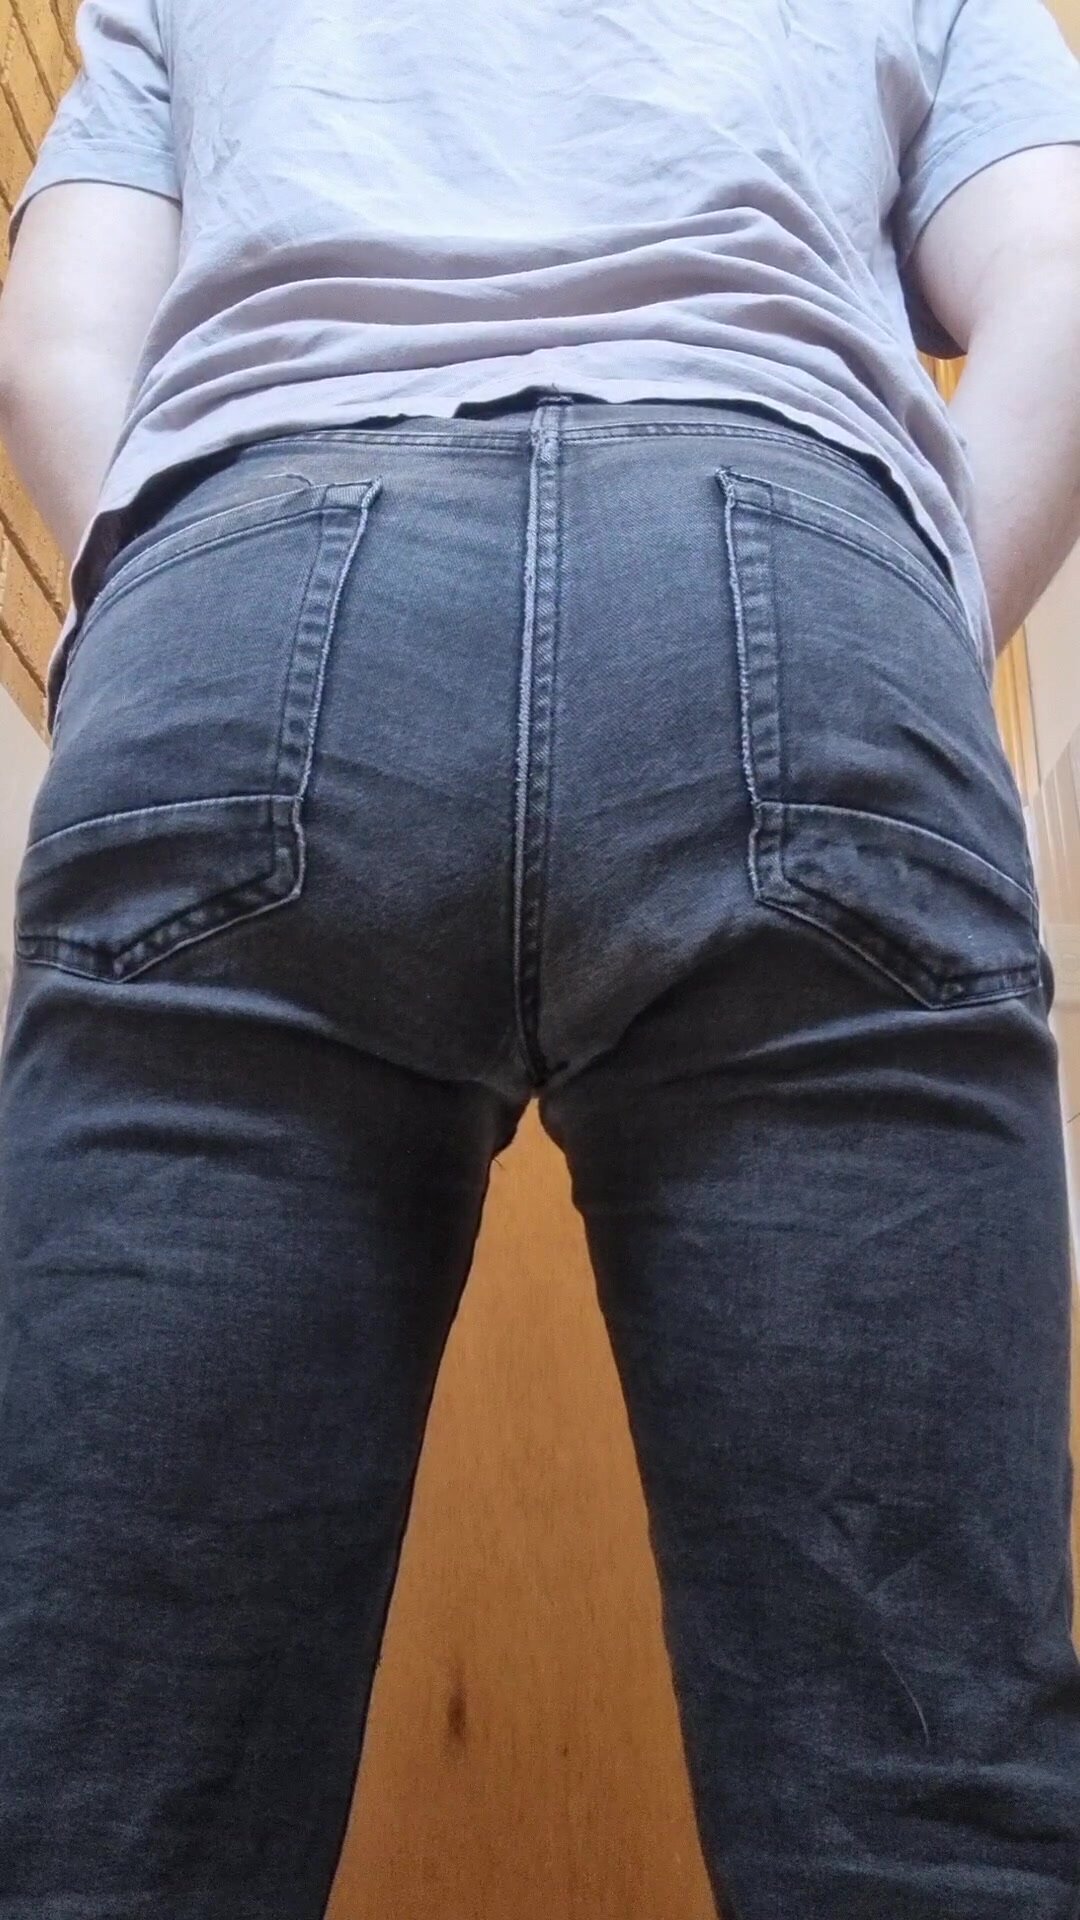 Filled my jeans